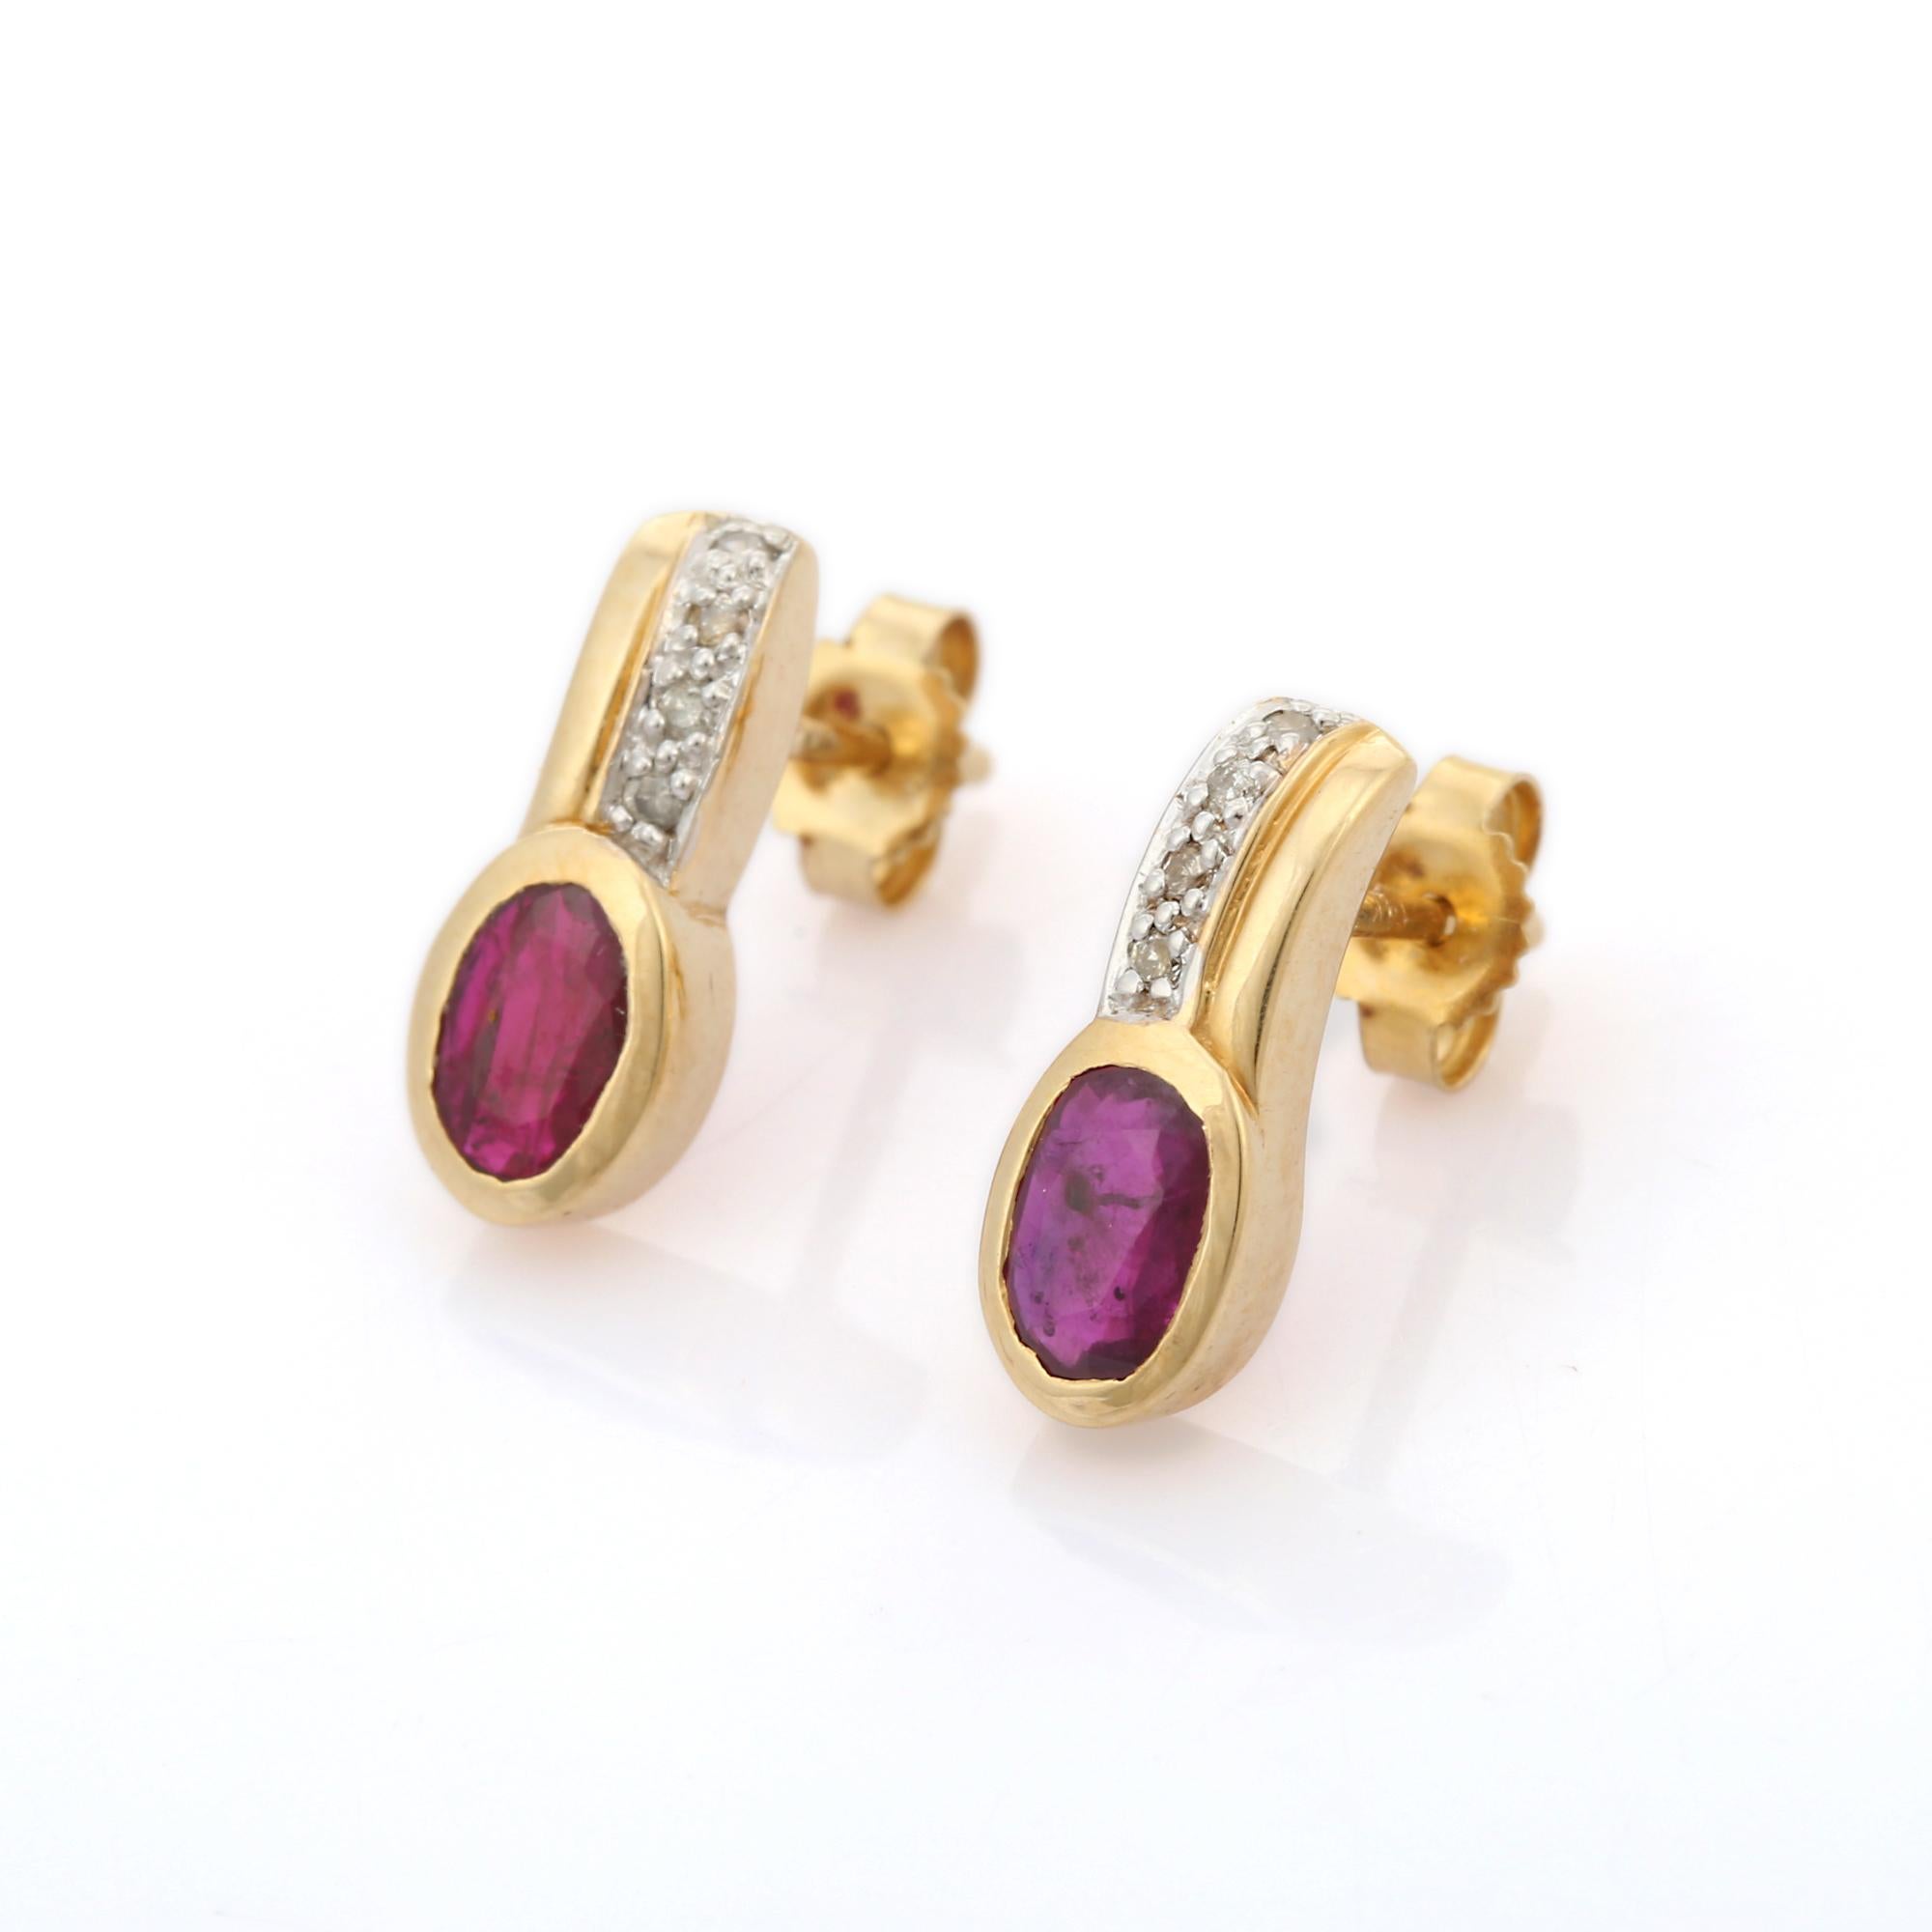 Ruby Stud Earrings with Diamonds in 14K gold. Studs create a subtle beauty while showcasing the colors of the natural precious gemstones and illuminating diamonds making a statement.
Embrace your look with these stunning pair of earrings suitable